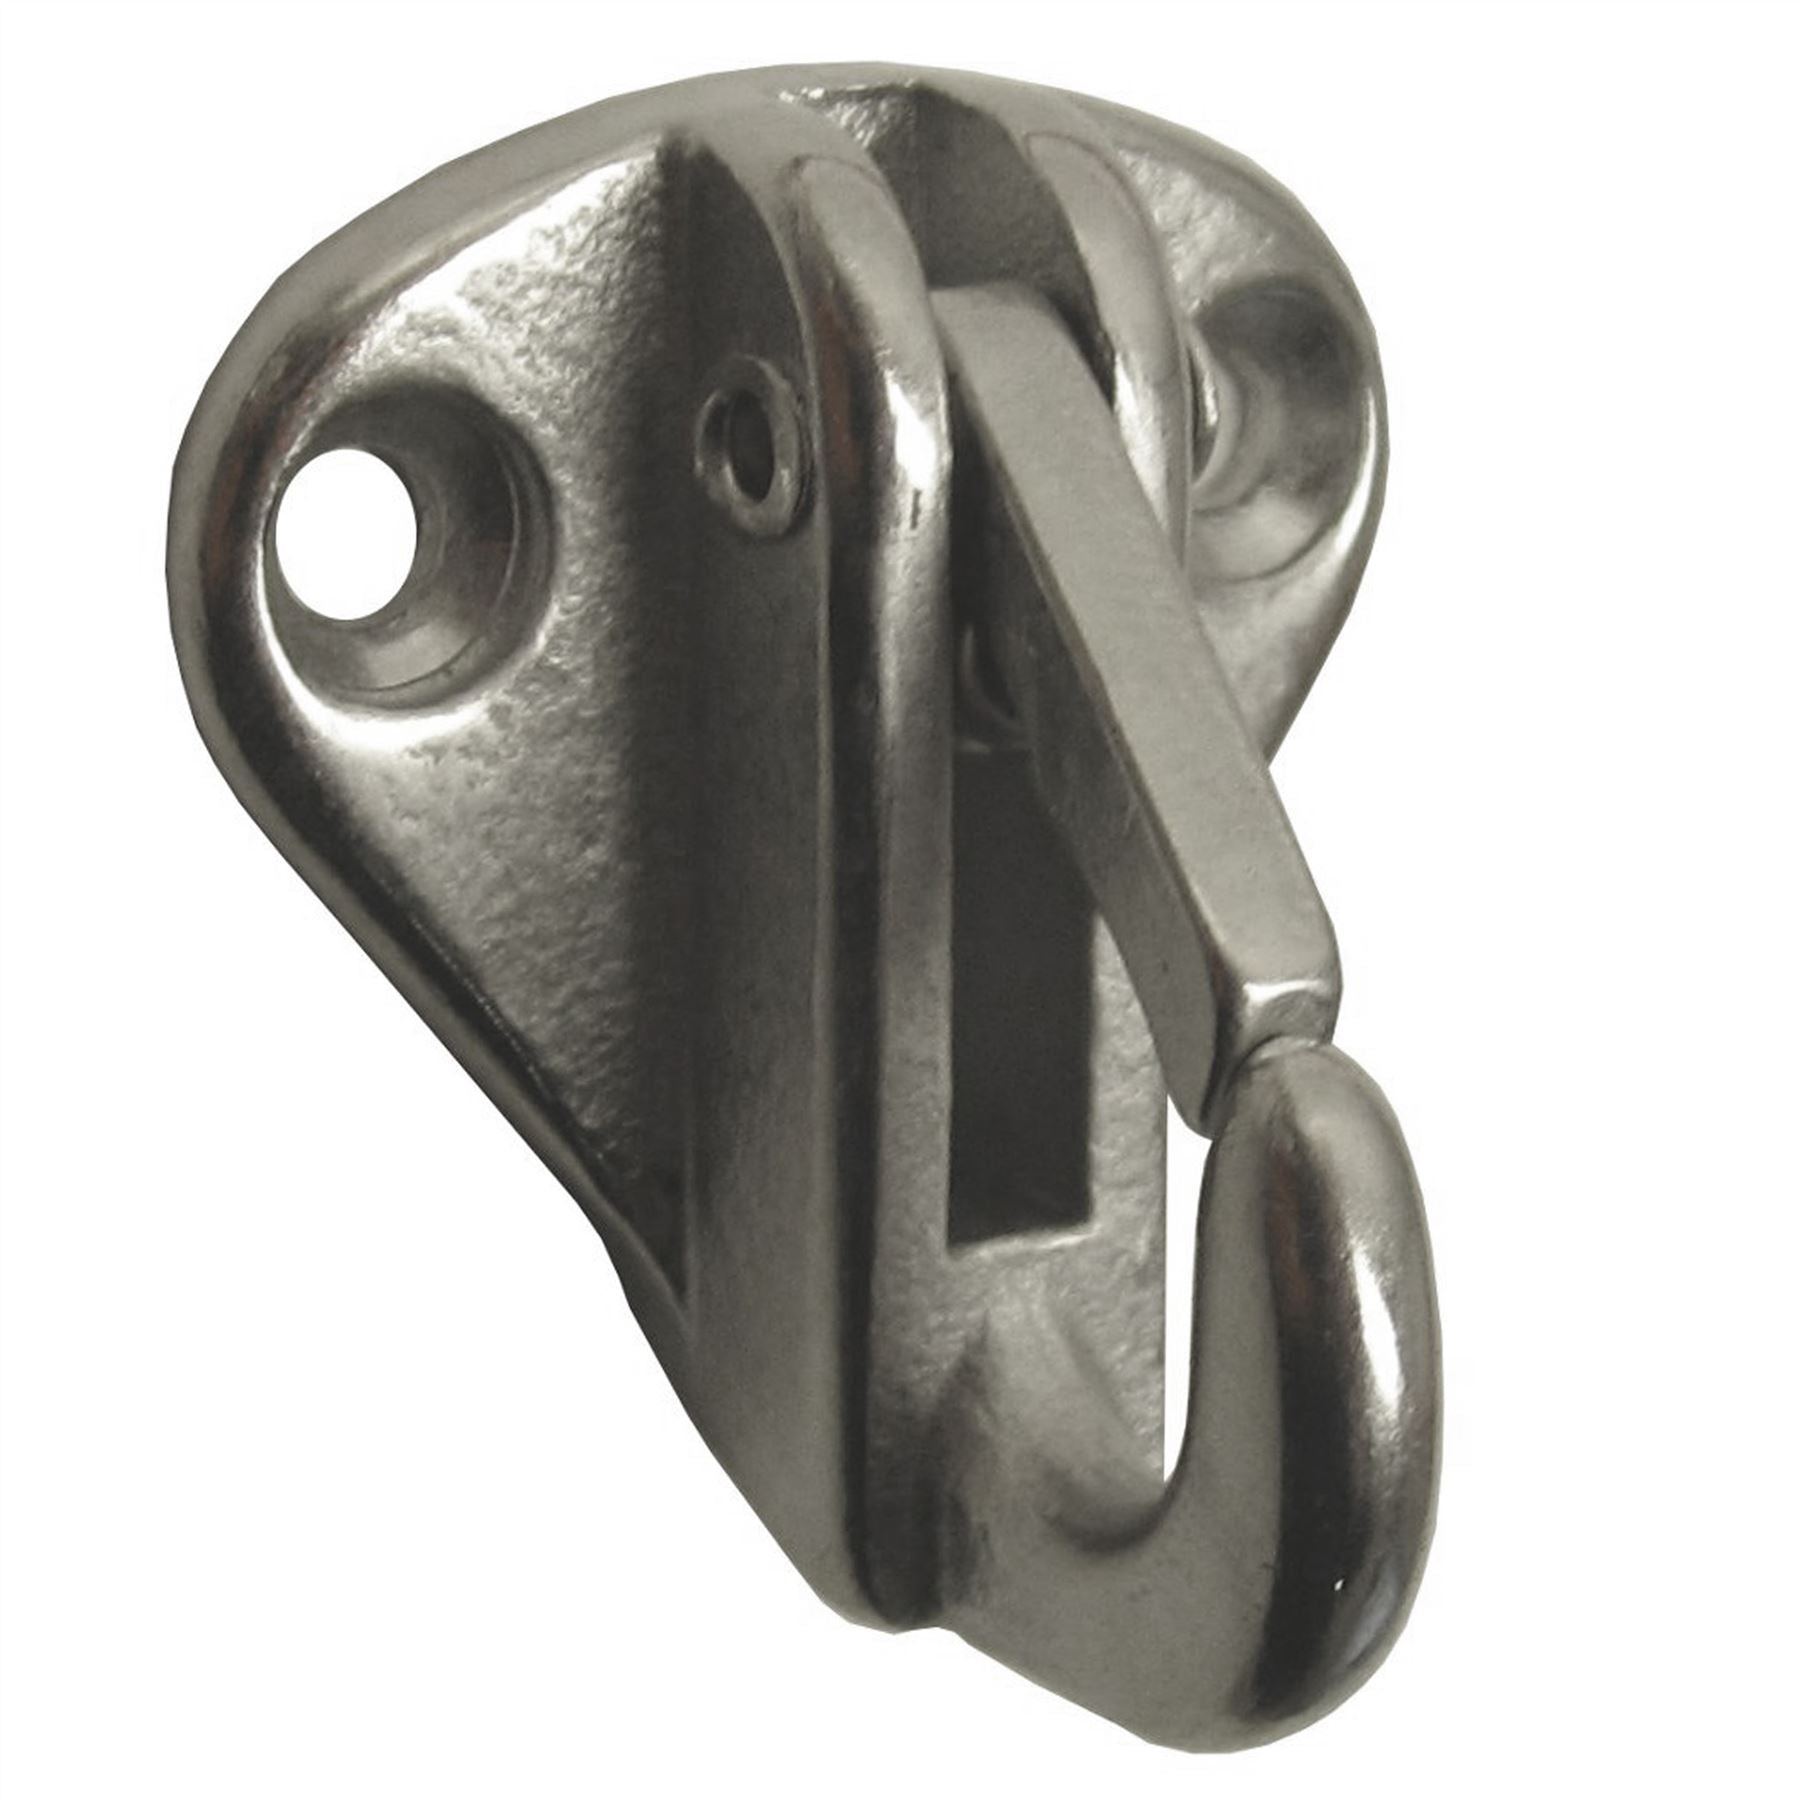 Fender Hook Snap Type With Spring Catch Stainless Steel Marine Grade